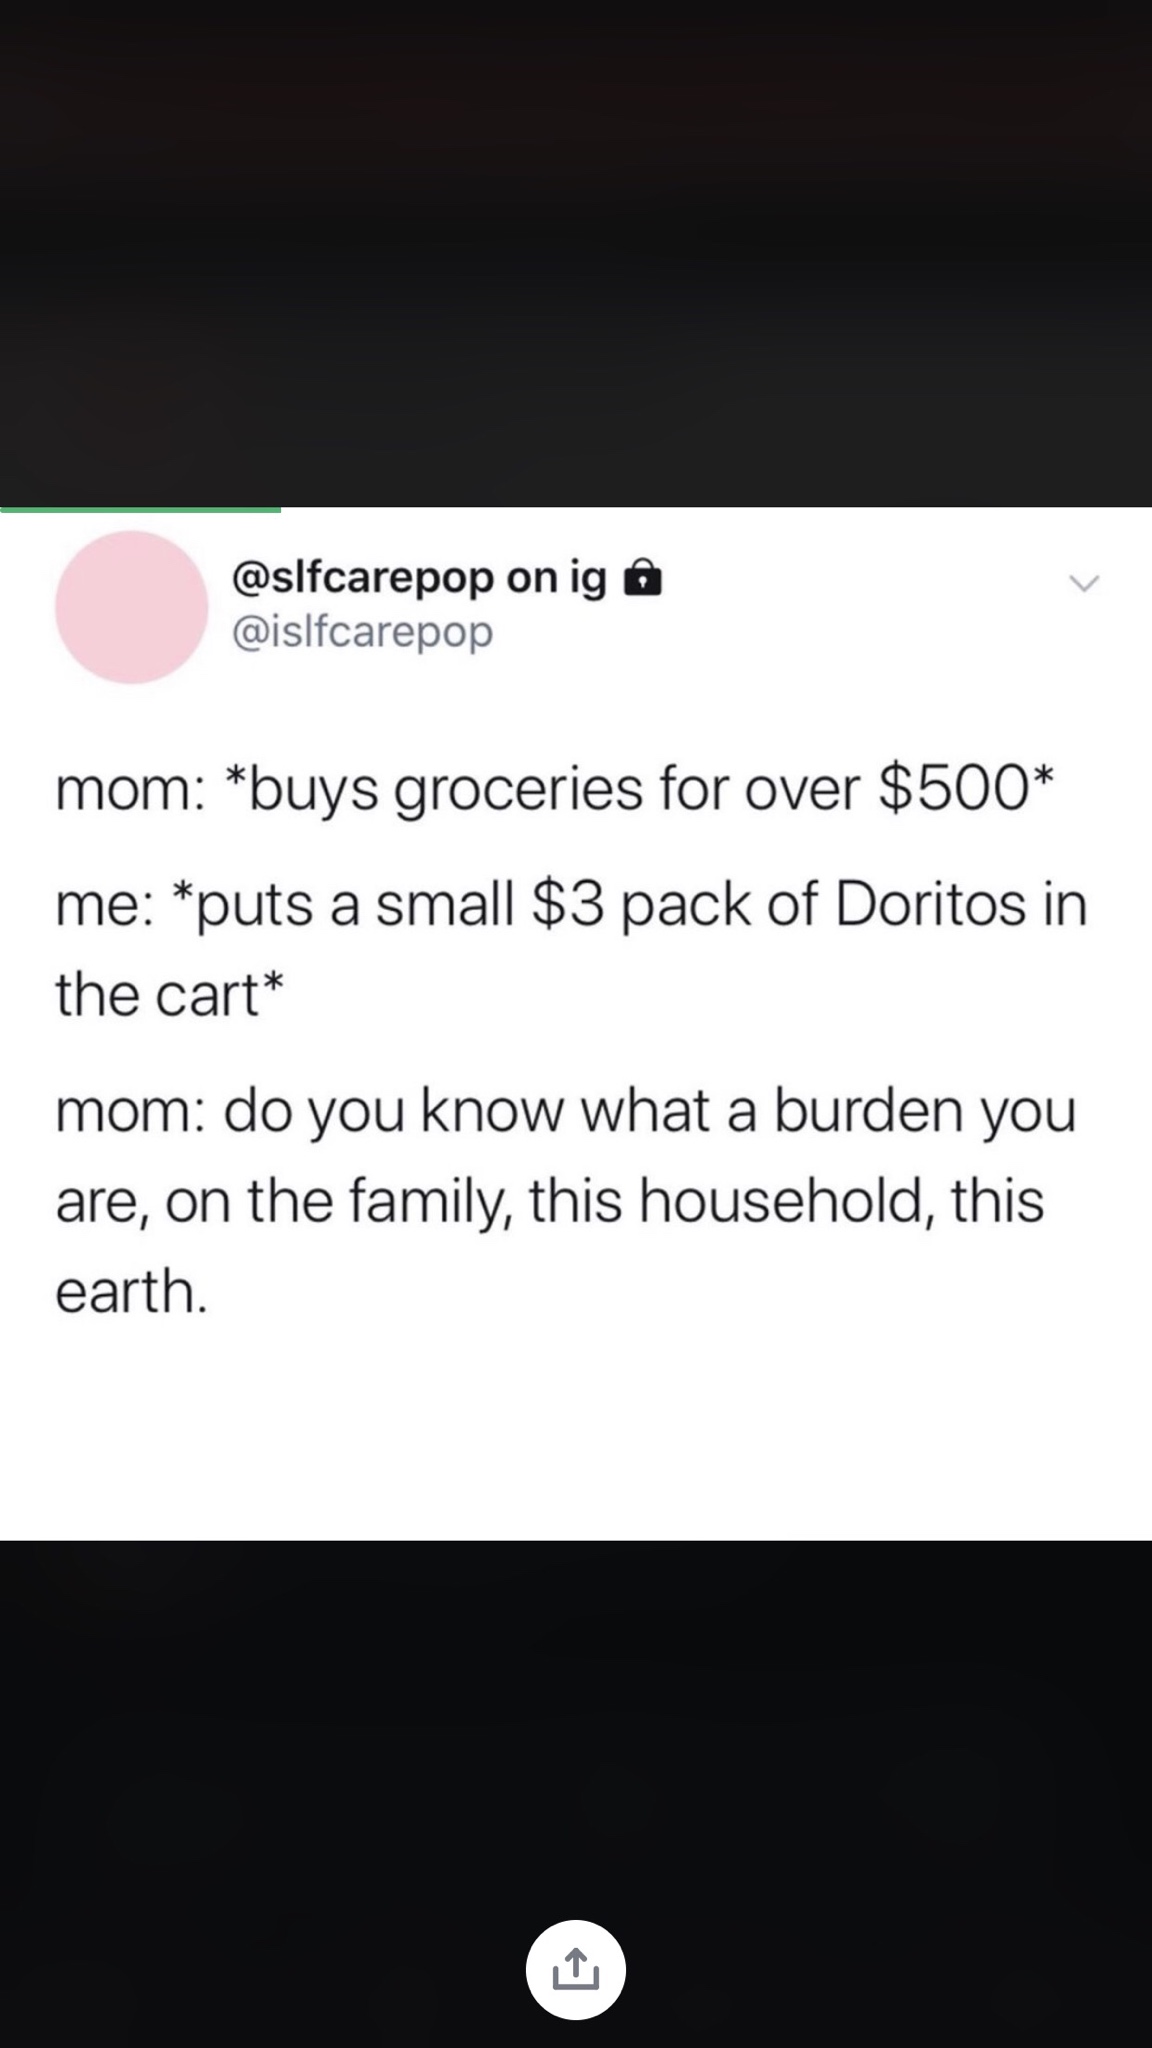 screenshot - on ig @ mom buys groceries for over $500 me puts a small $3 pack of Doritos in the cart mom do you know what a burden you are, on the family, this household, this earth.